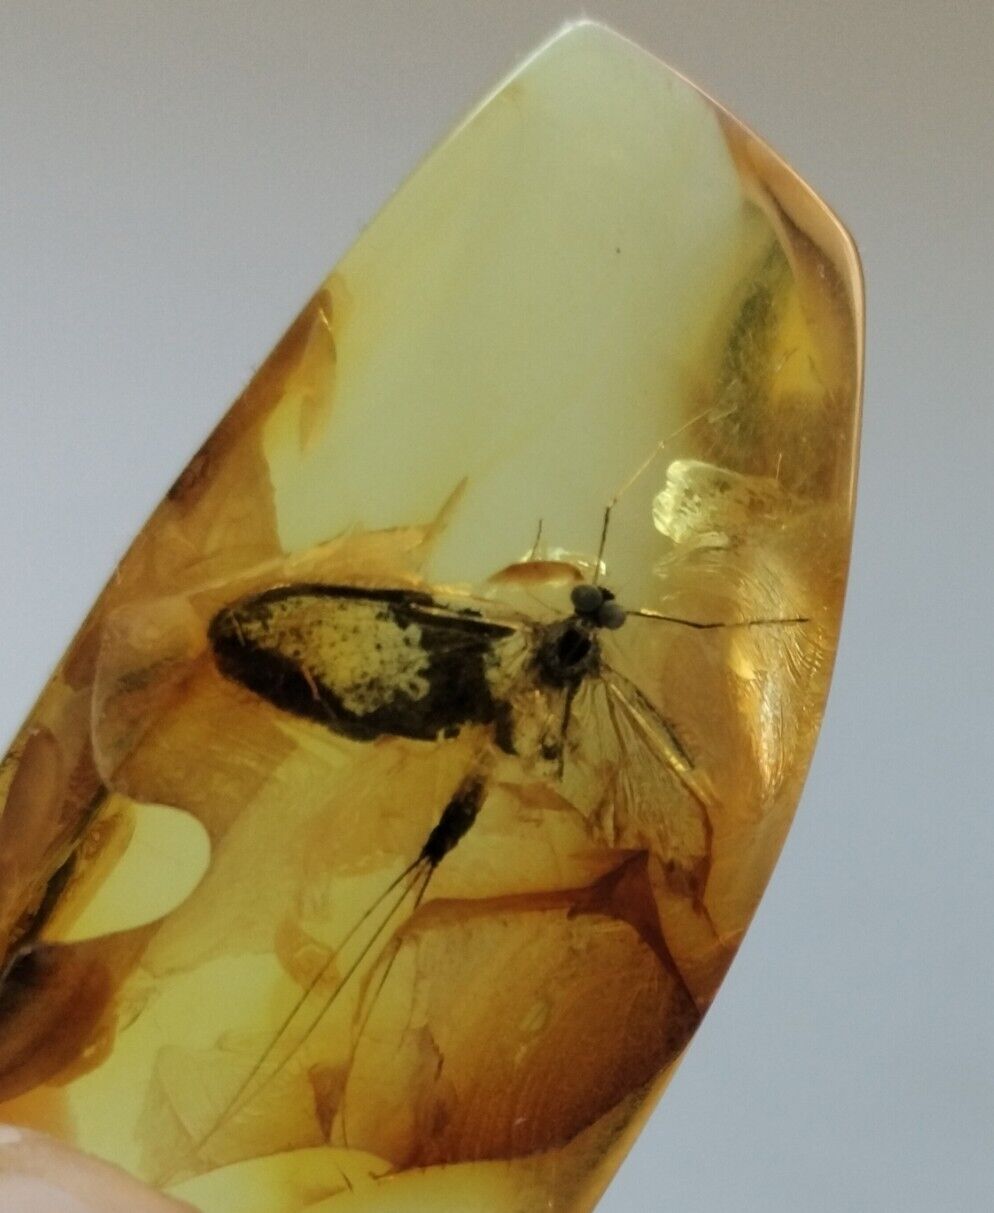 Baltic natural amber, fossil insect. Weight 5 grams.